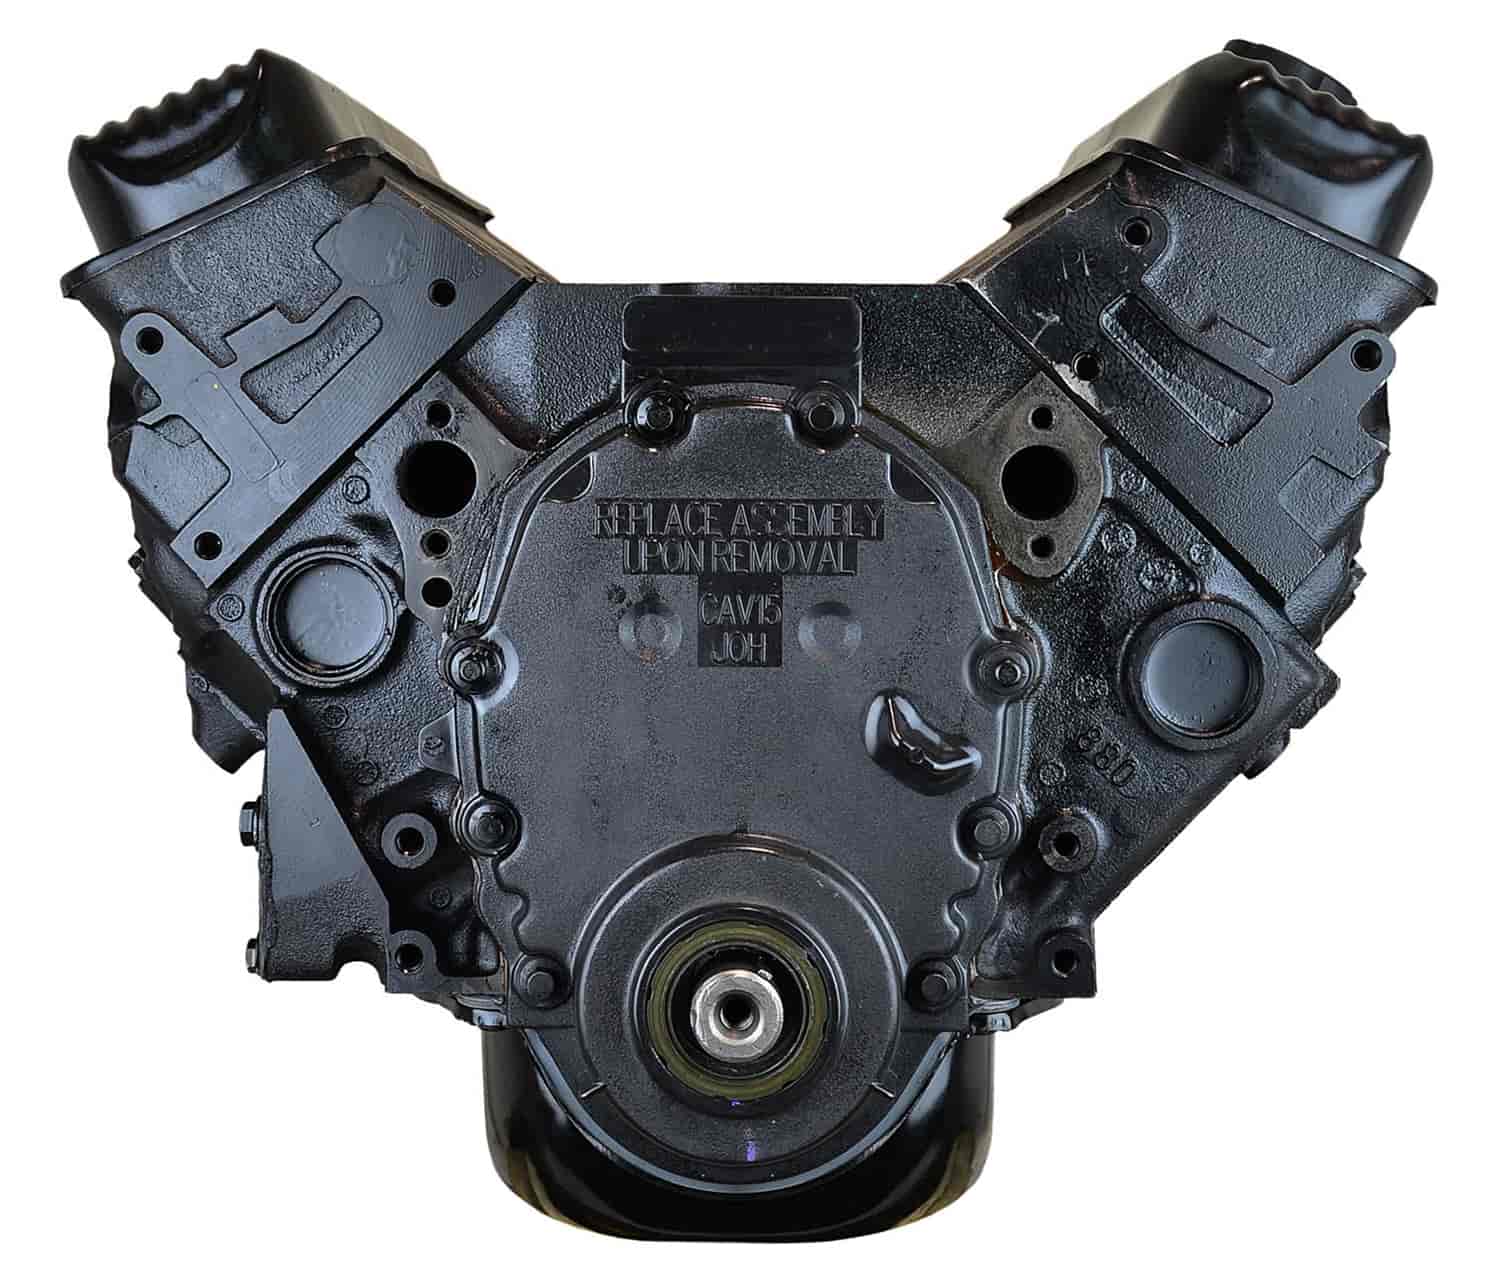 Remanufactured Crate Engine for Marine Applications with 1996-2006 Small Block Chevy 305ci/5.0L